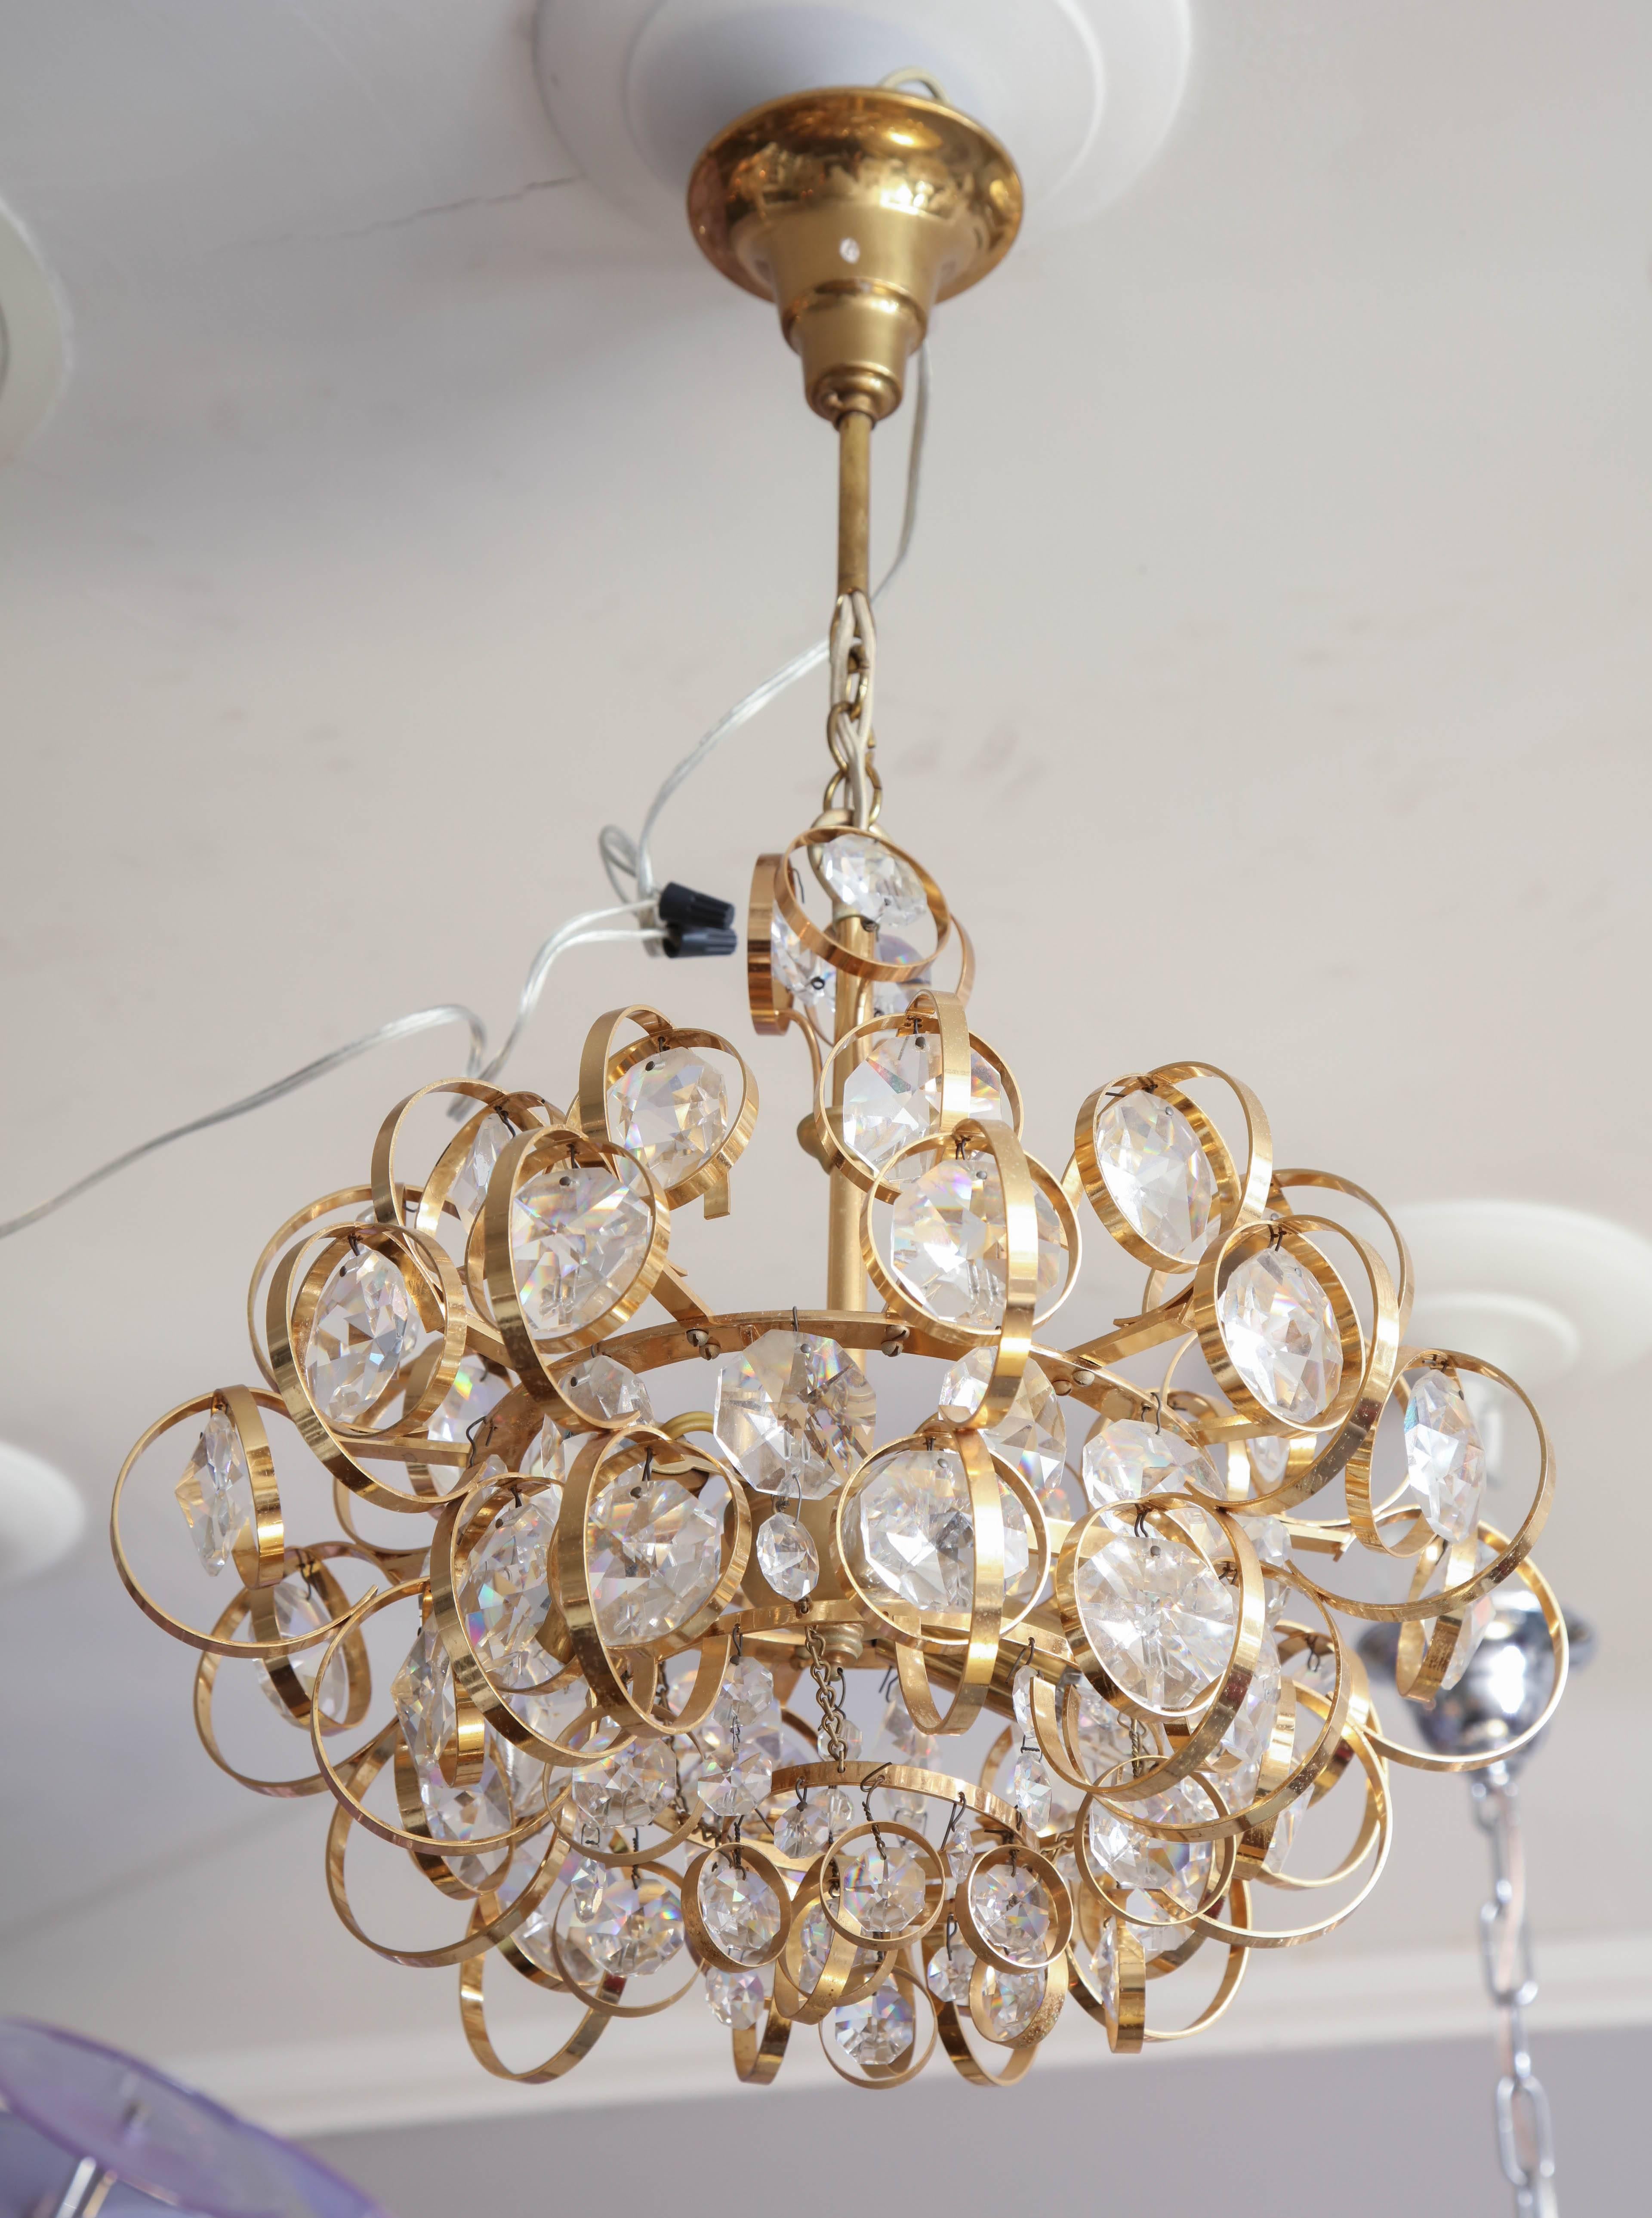 Glamorous petite vintage Palwa chandelier. It has 3 candelabra sockets and is in excellent condition with minimum wear that is consistent with its age and use.